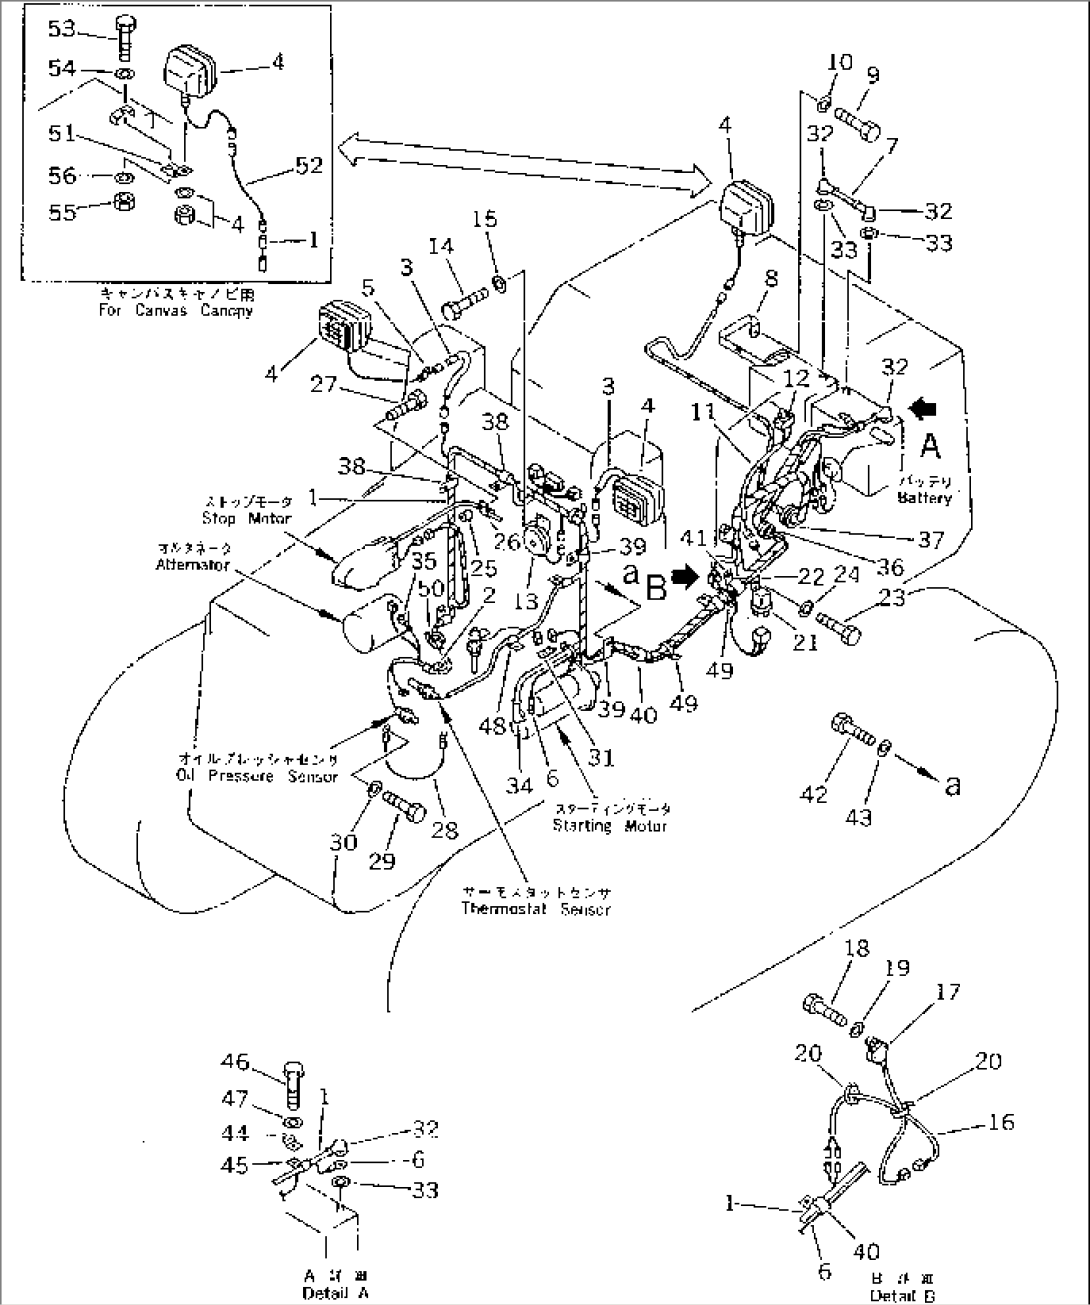 ELECTRICAL SYSTEM (WITH KEY STOP MOTOR)